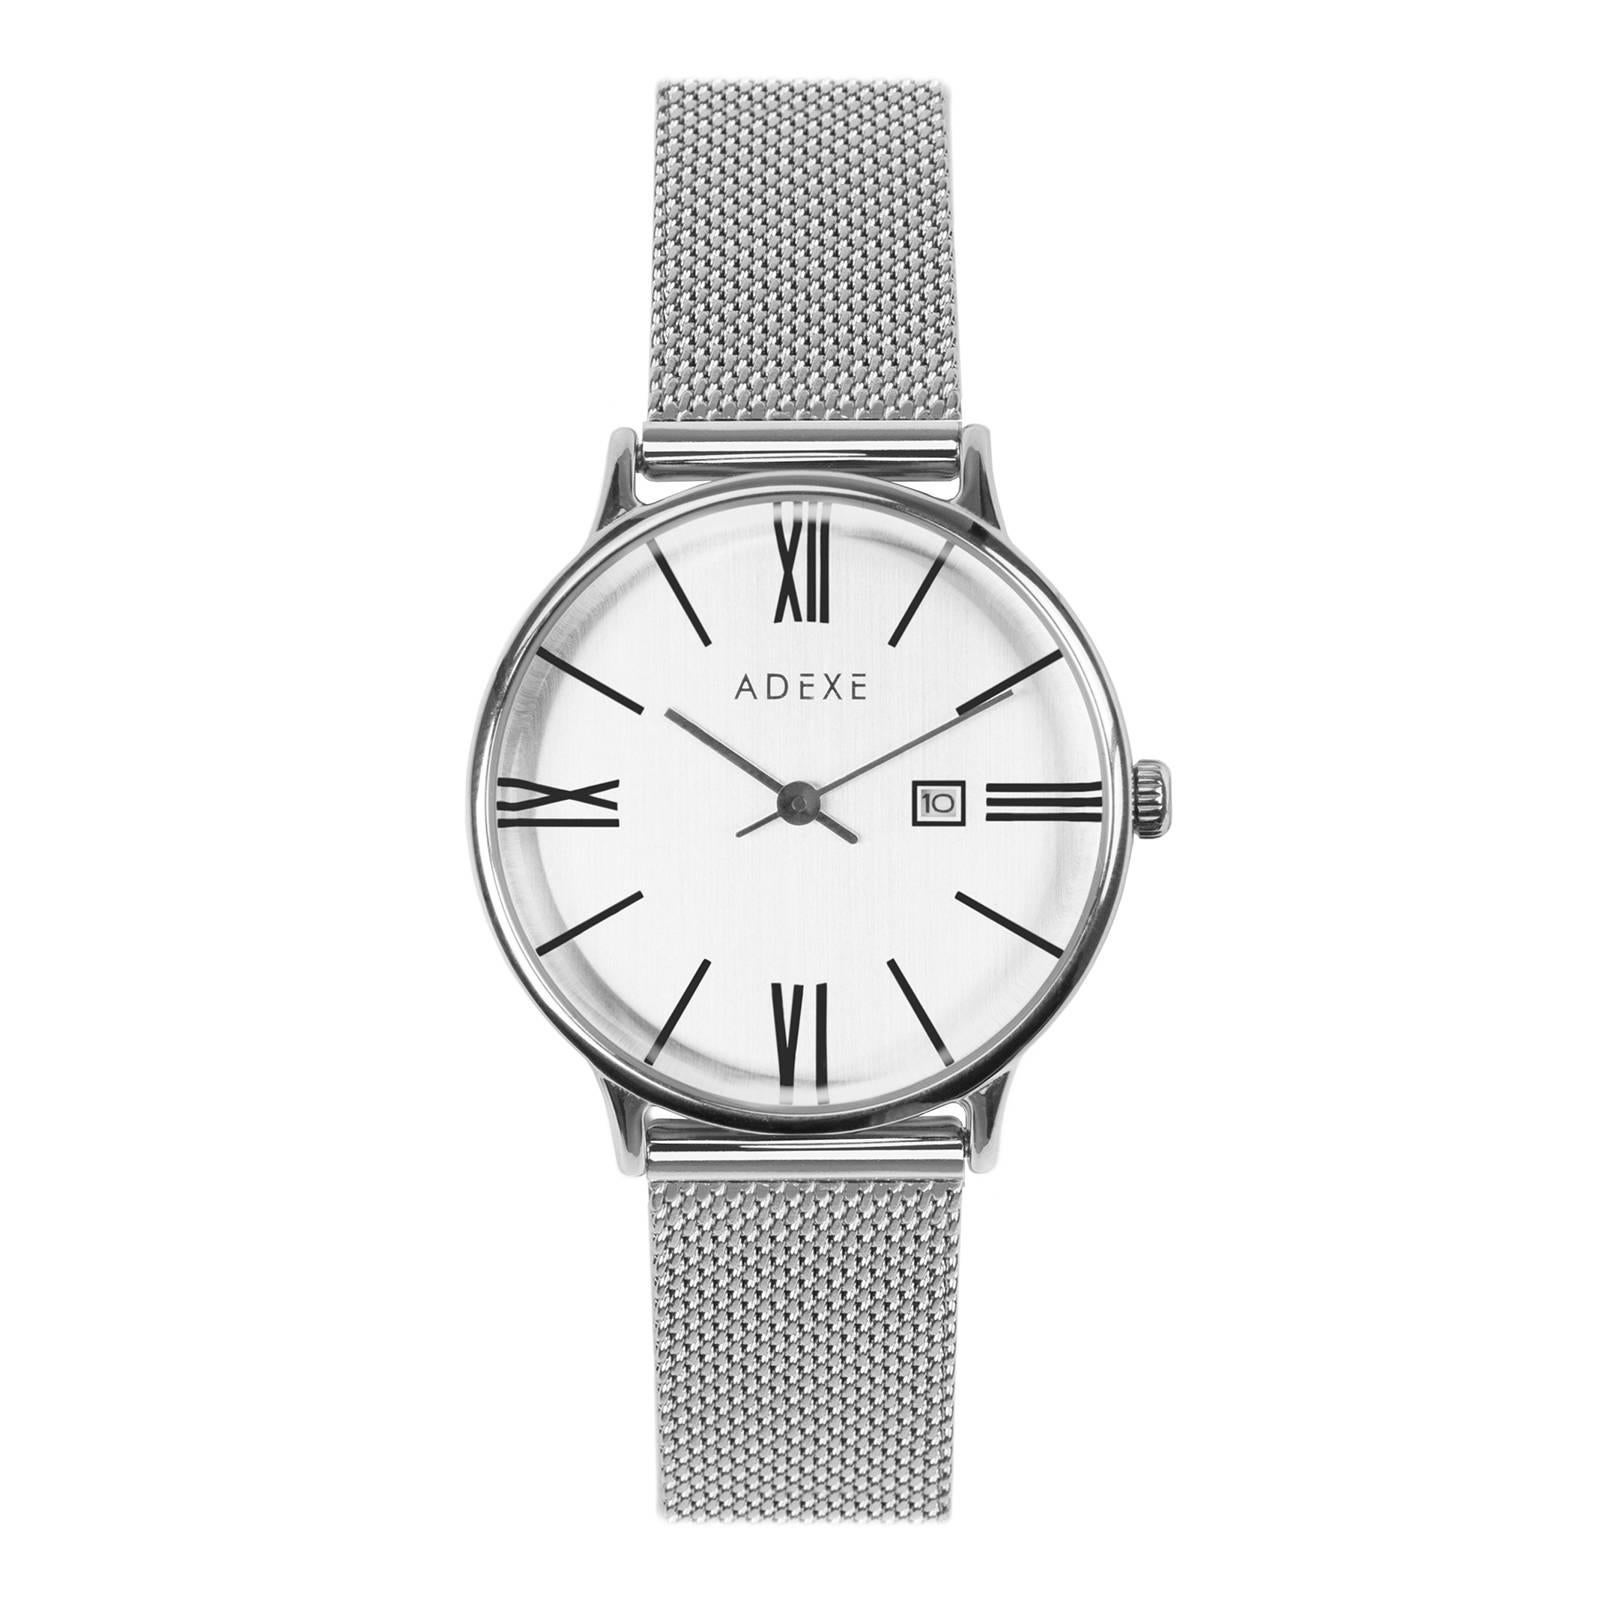 ADEXE Watches Stainless Steel Meek Petite Japanese Quartz Wristwatch For Sale